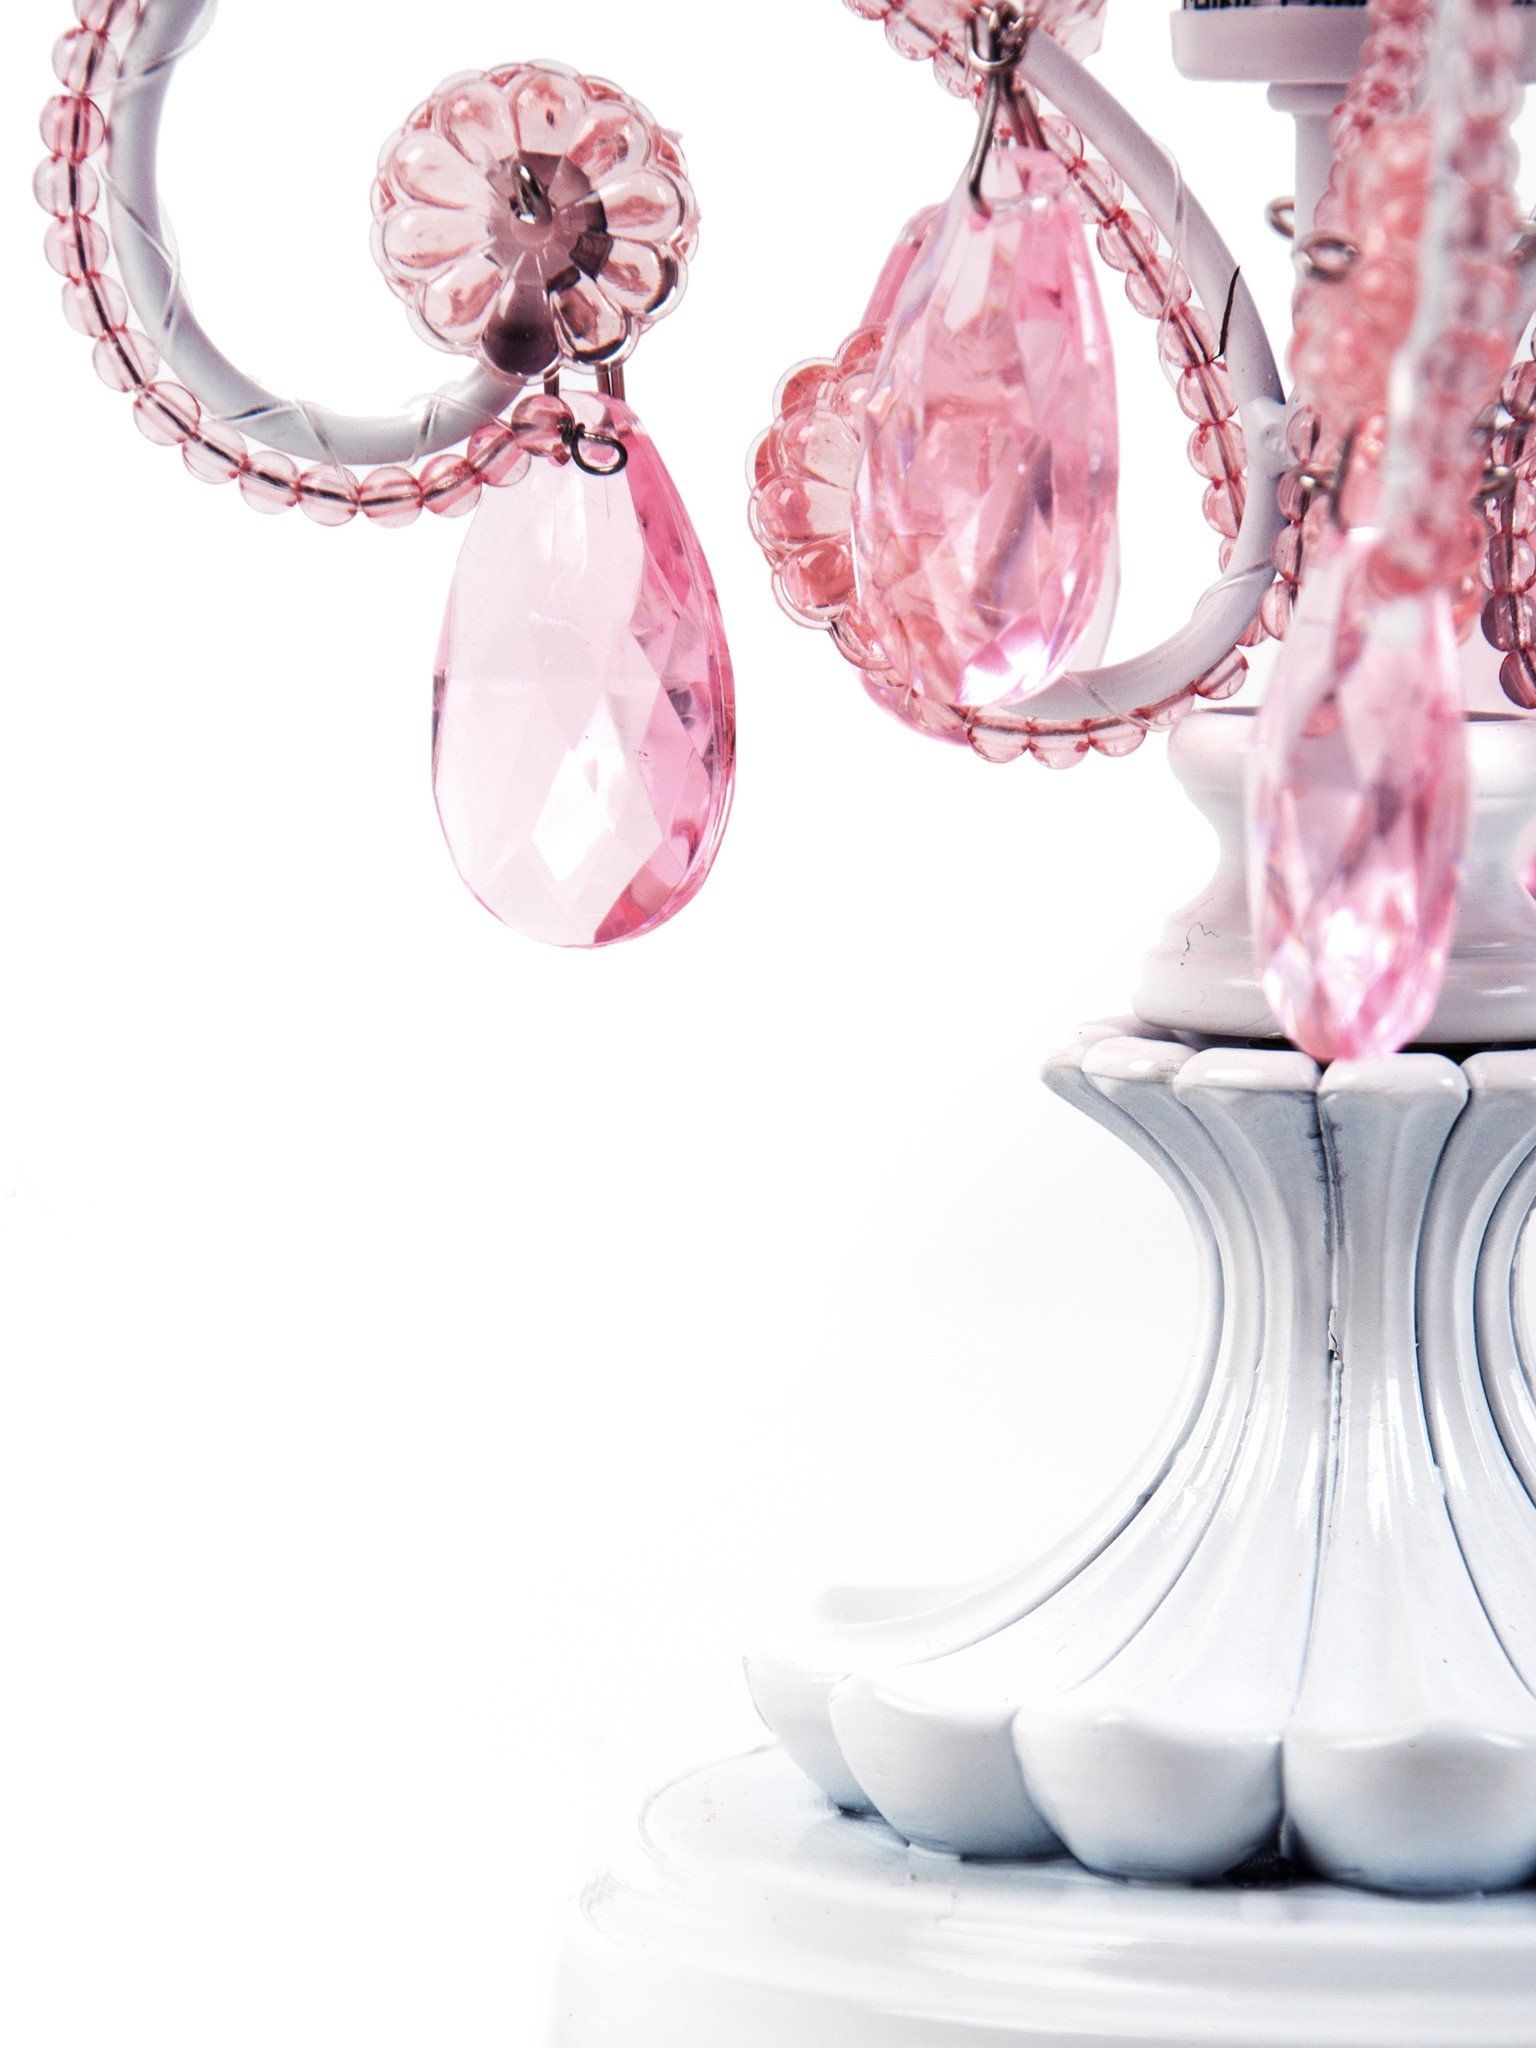 Chandelier Table Lamp Pink Cashorika Decoration In Small Chandelier Table Lamps (View 15 of 25)